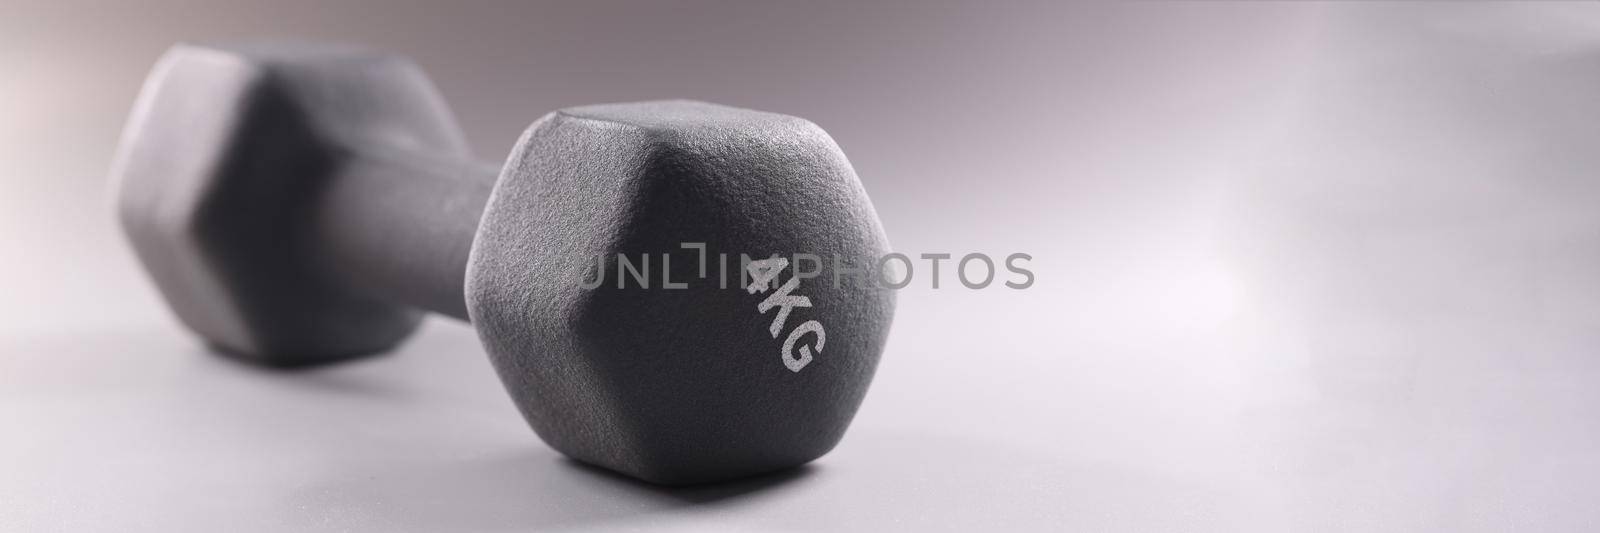 Black sports dumbbell for bodybuilding on gray background closeup. Sale of sports accessories concept